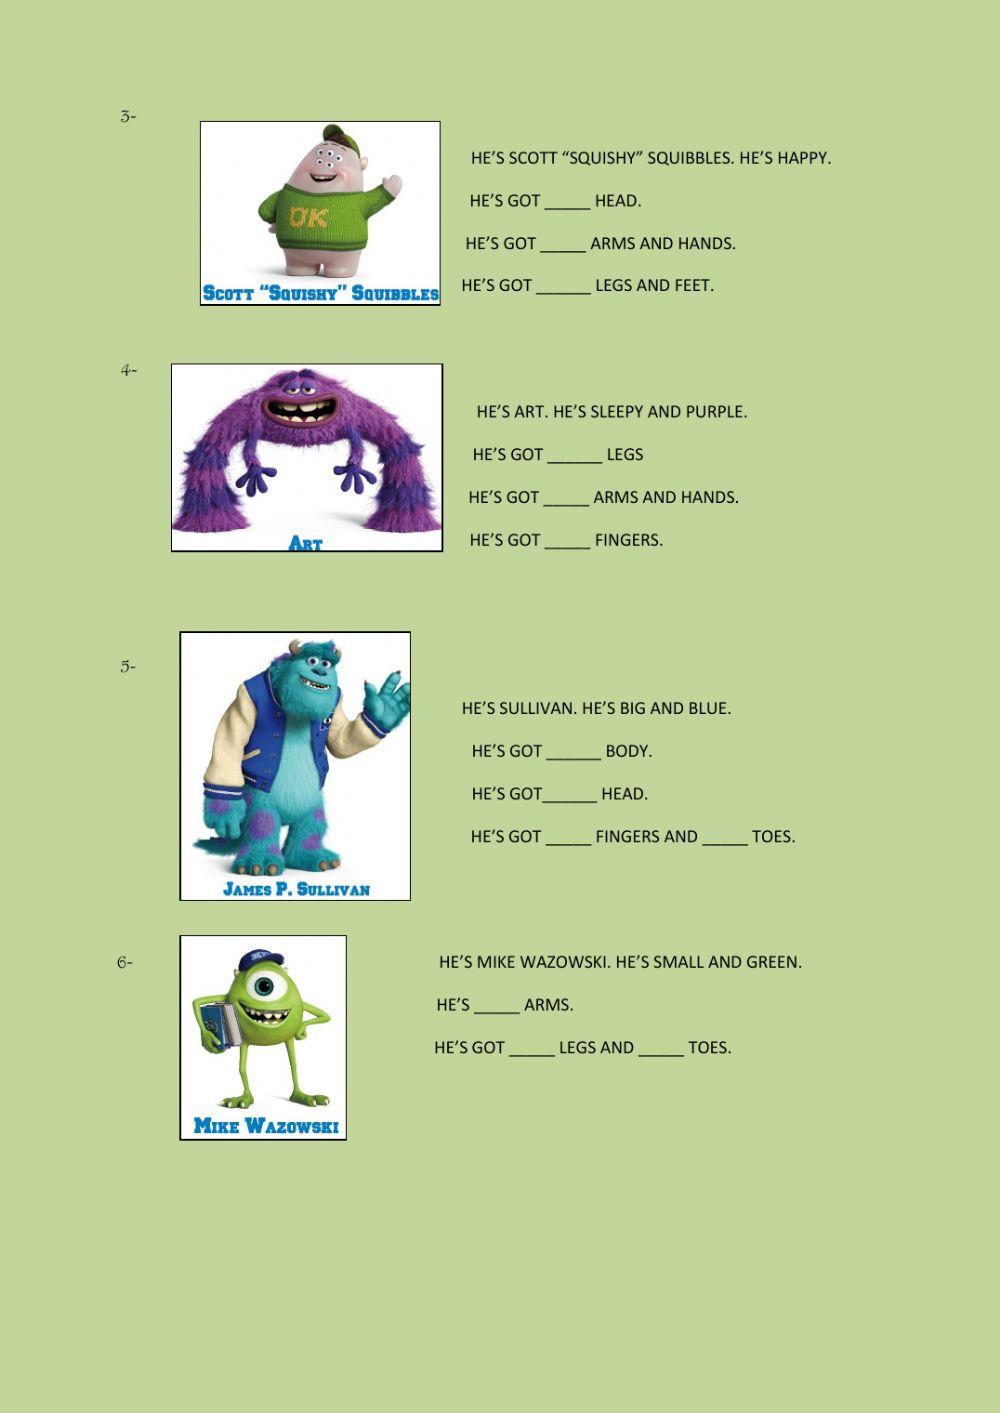 Video Session: Monsters University